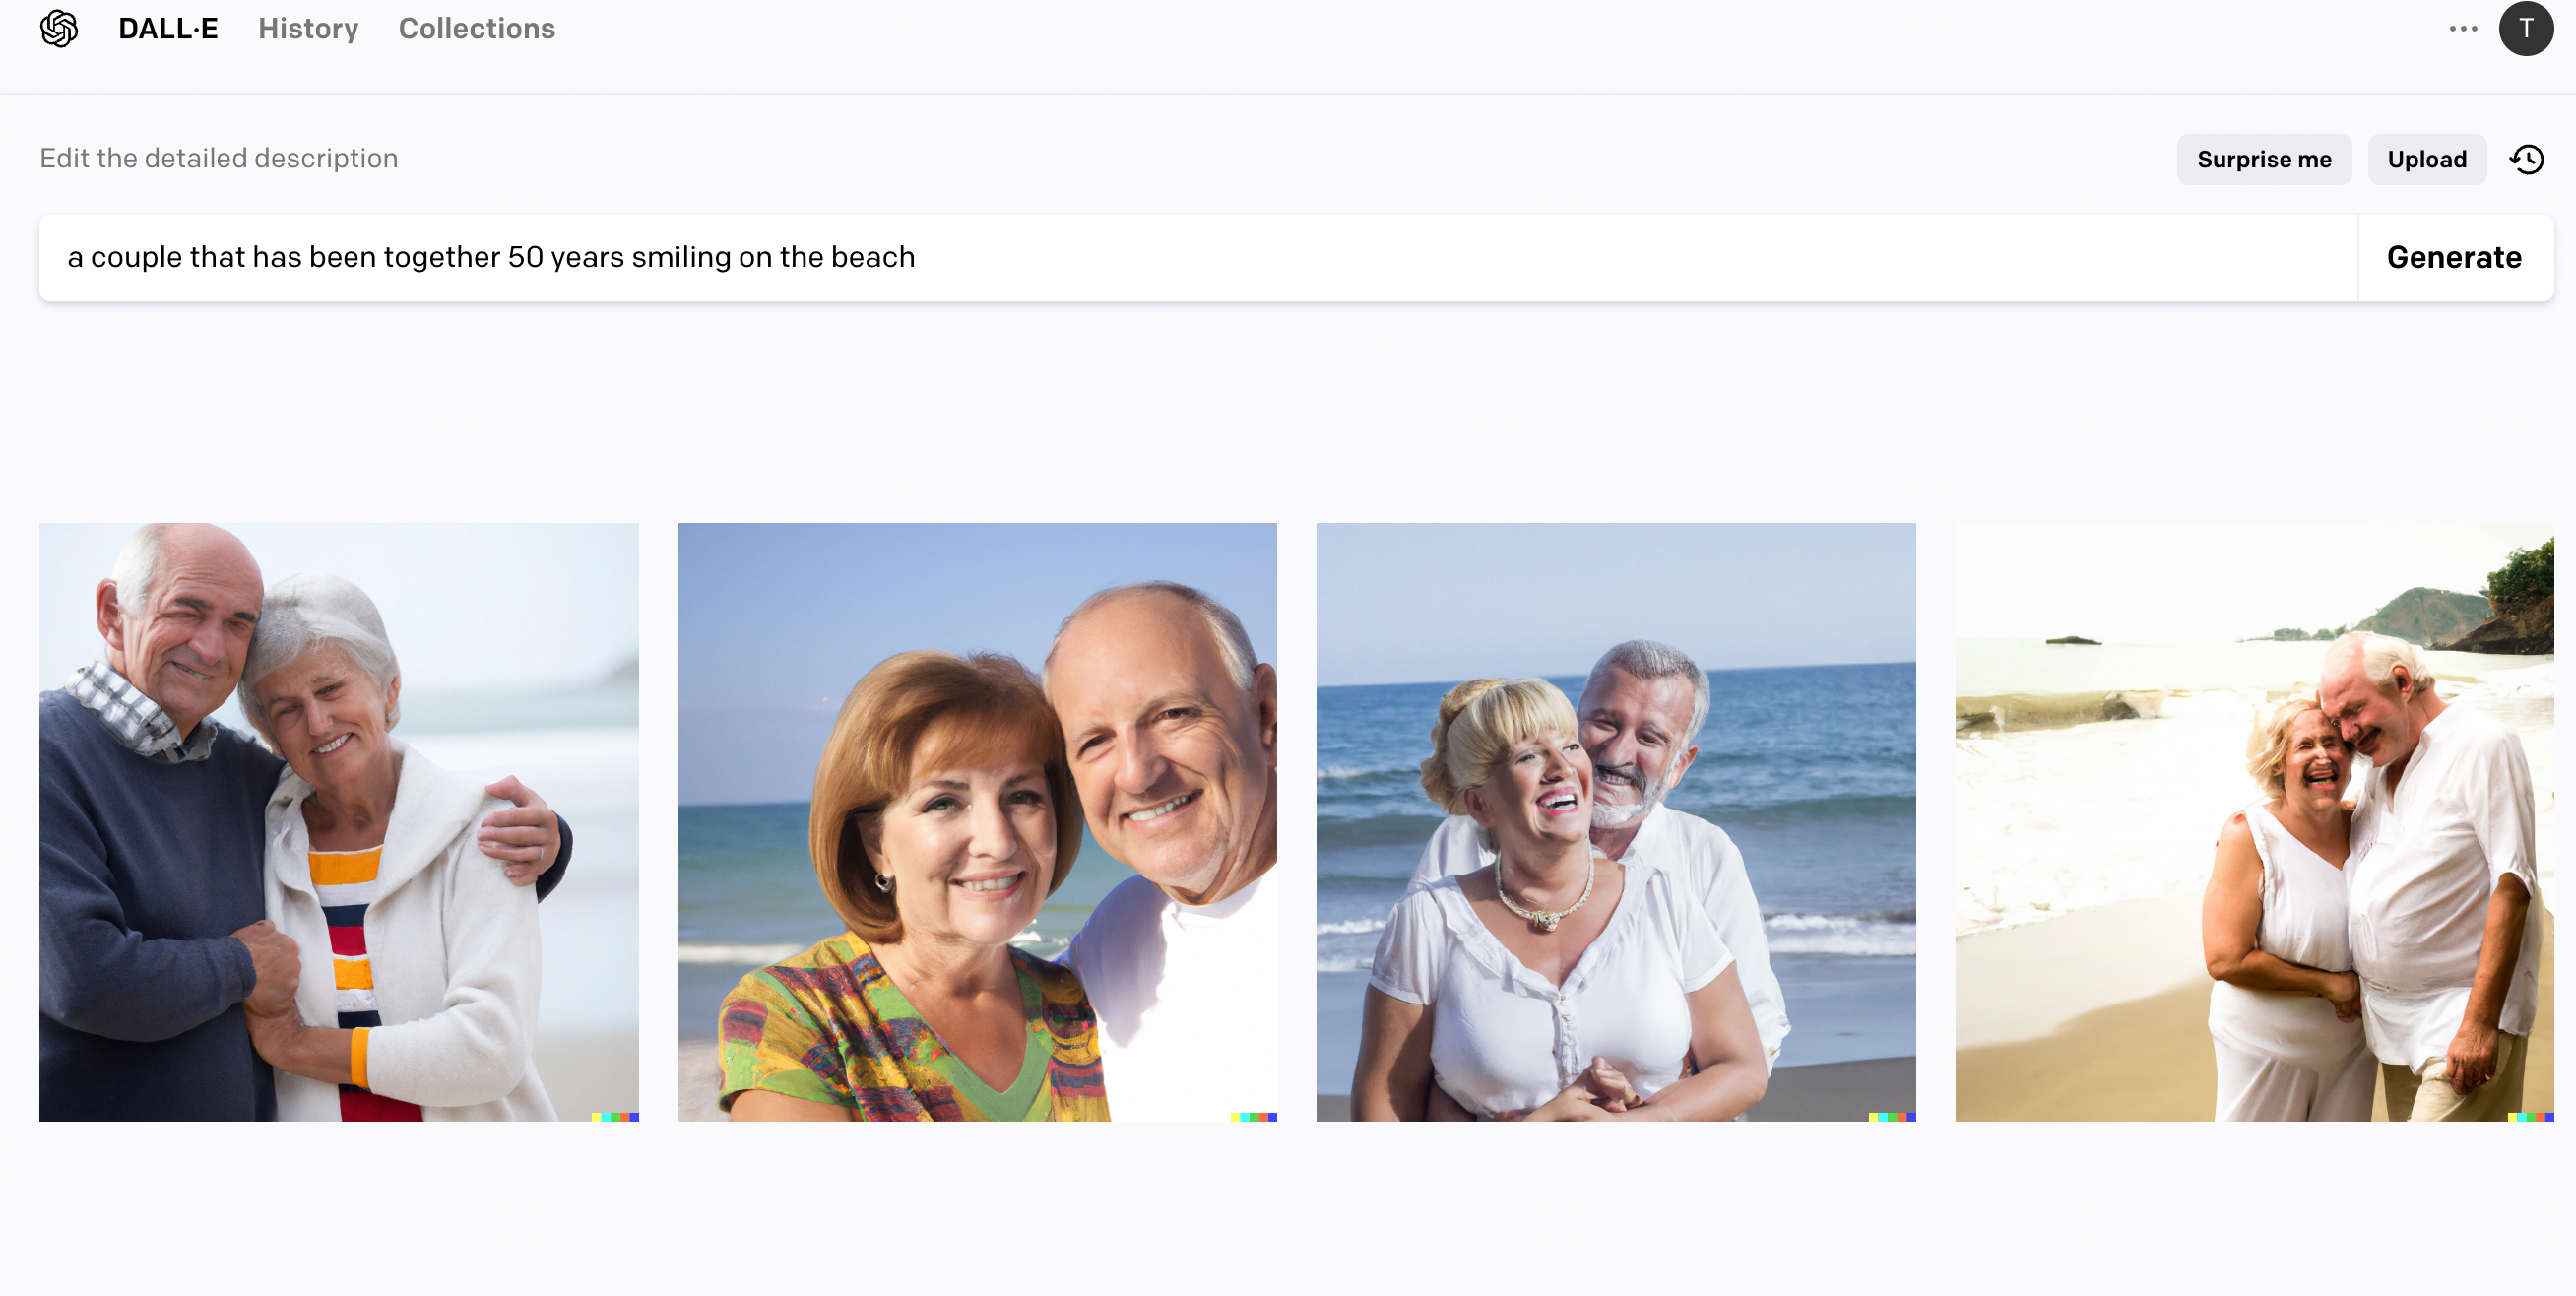 A grid of smiling white couples on the beach.